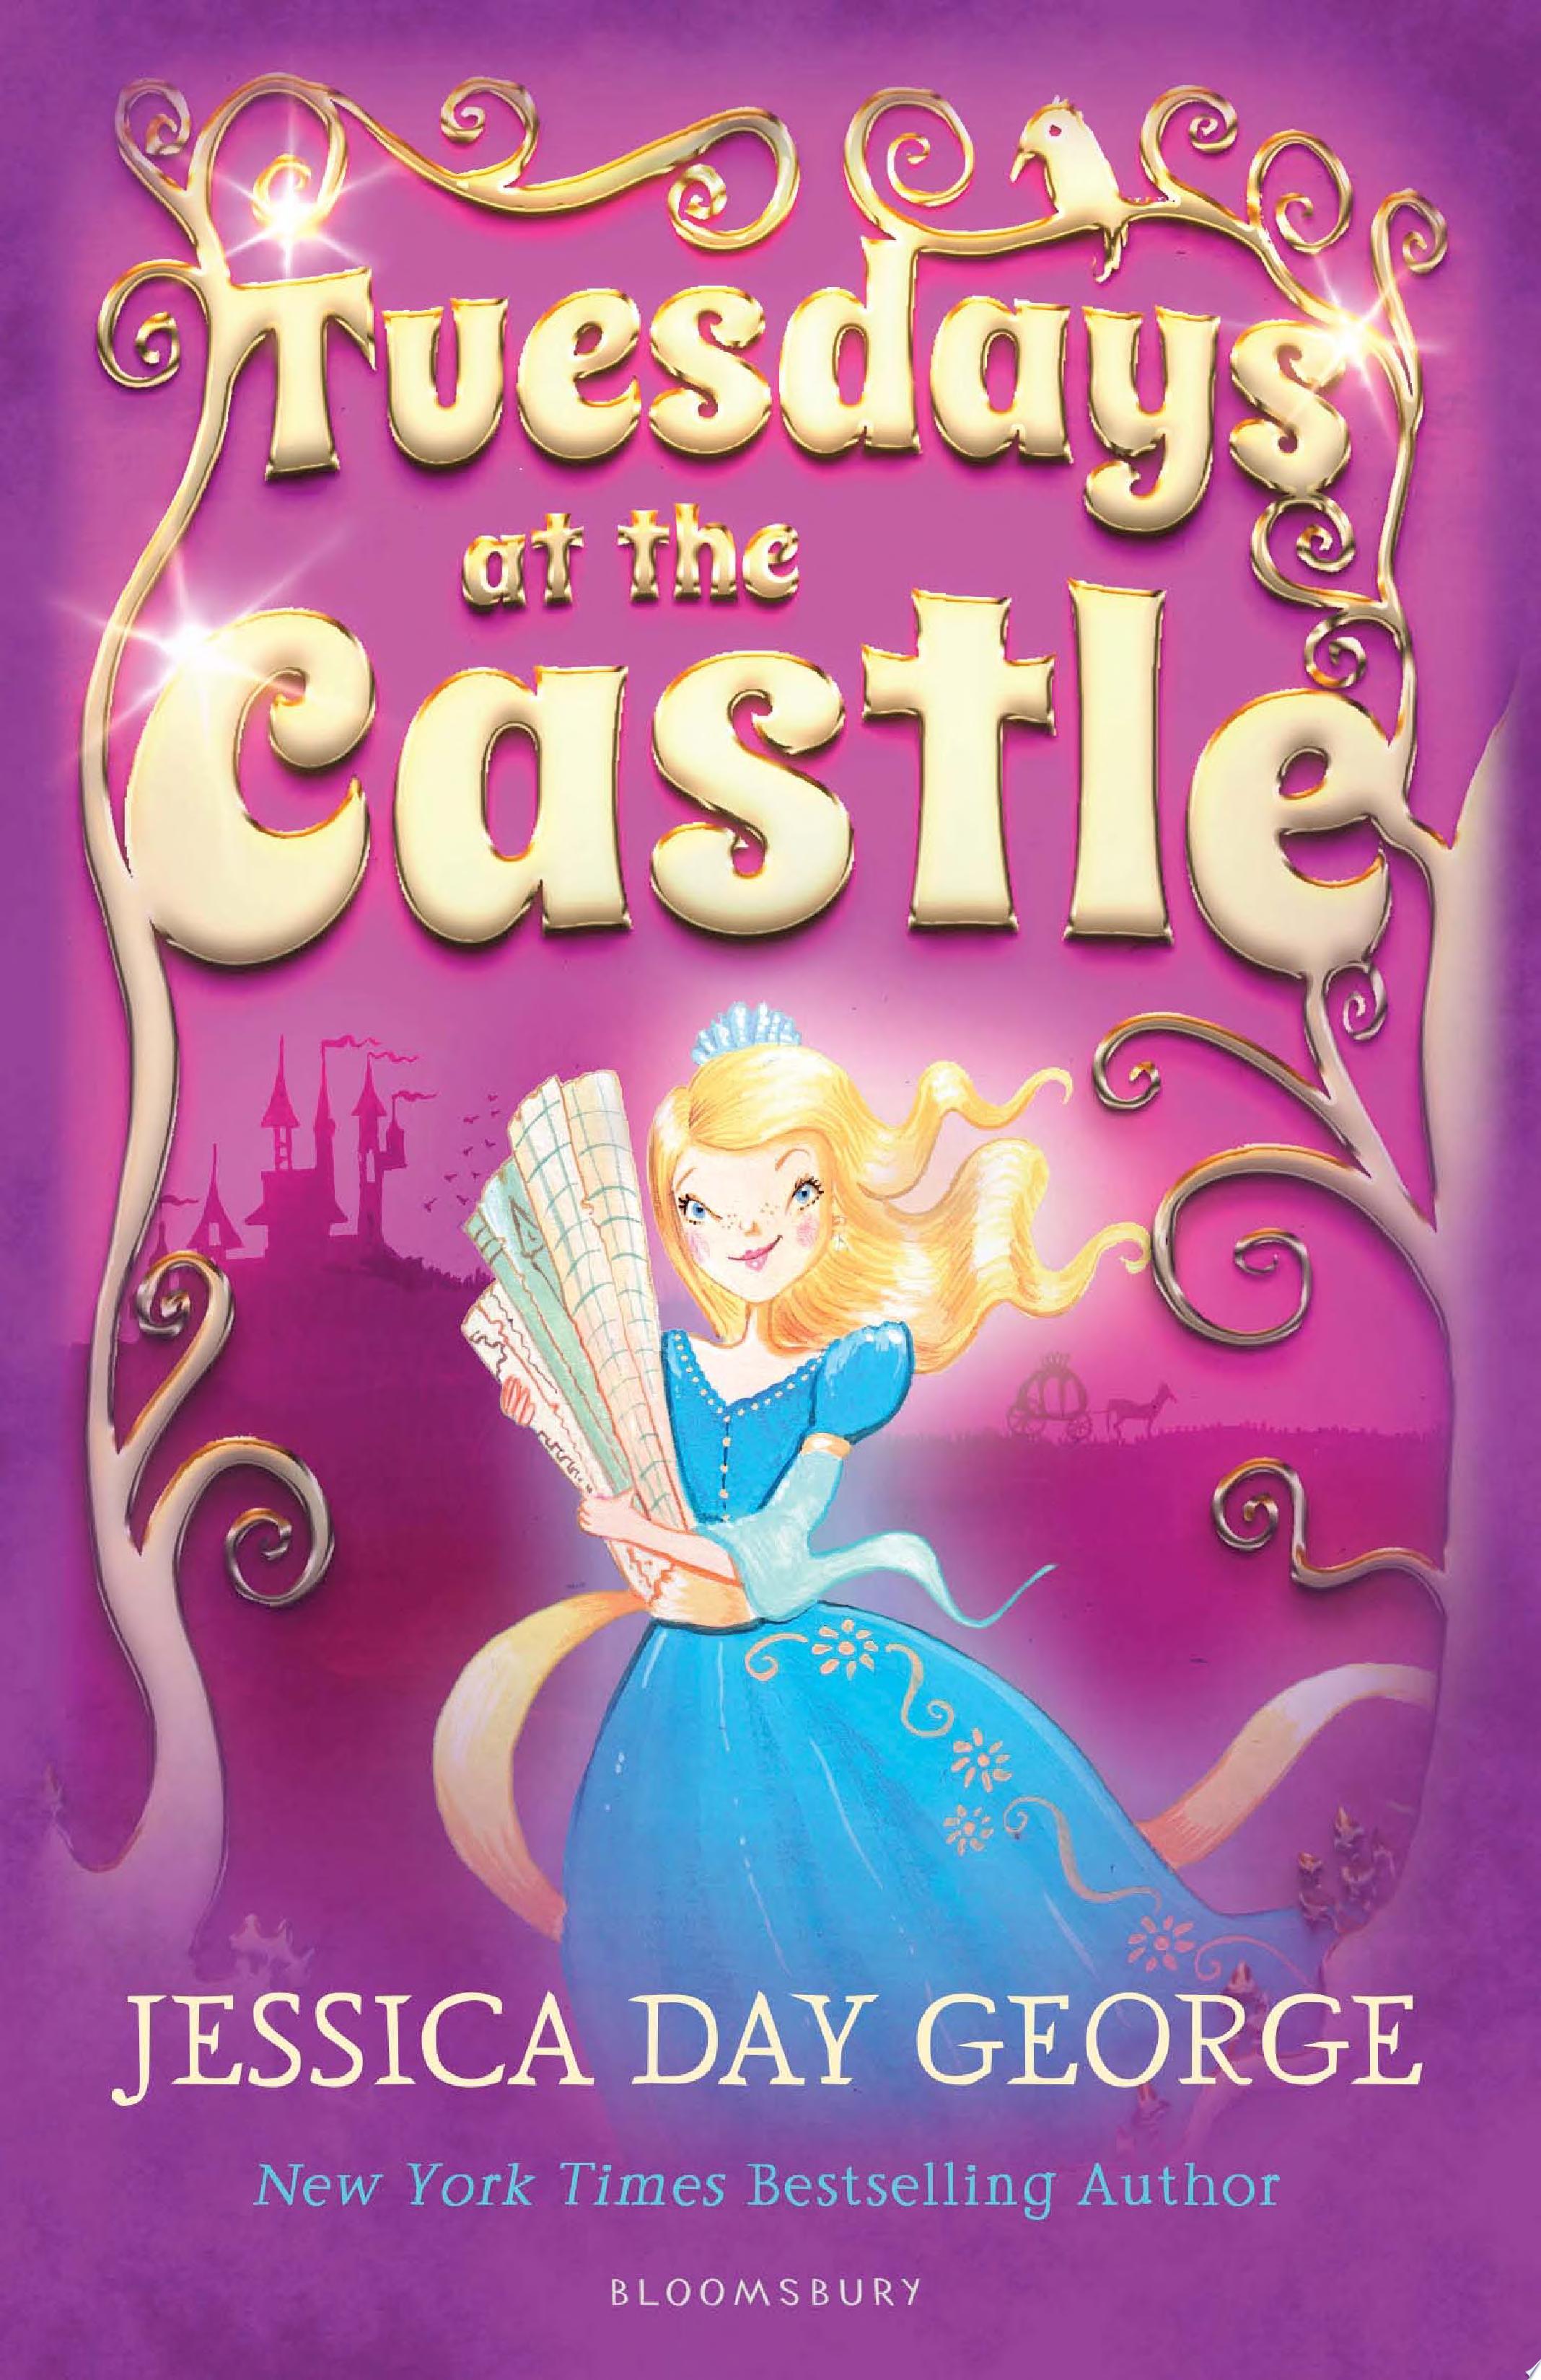 Image for "Tuesdays at the Castle"